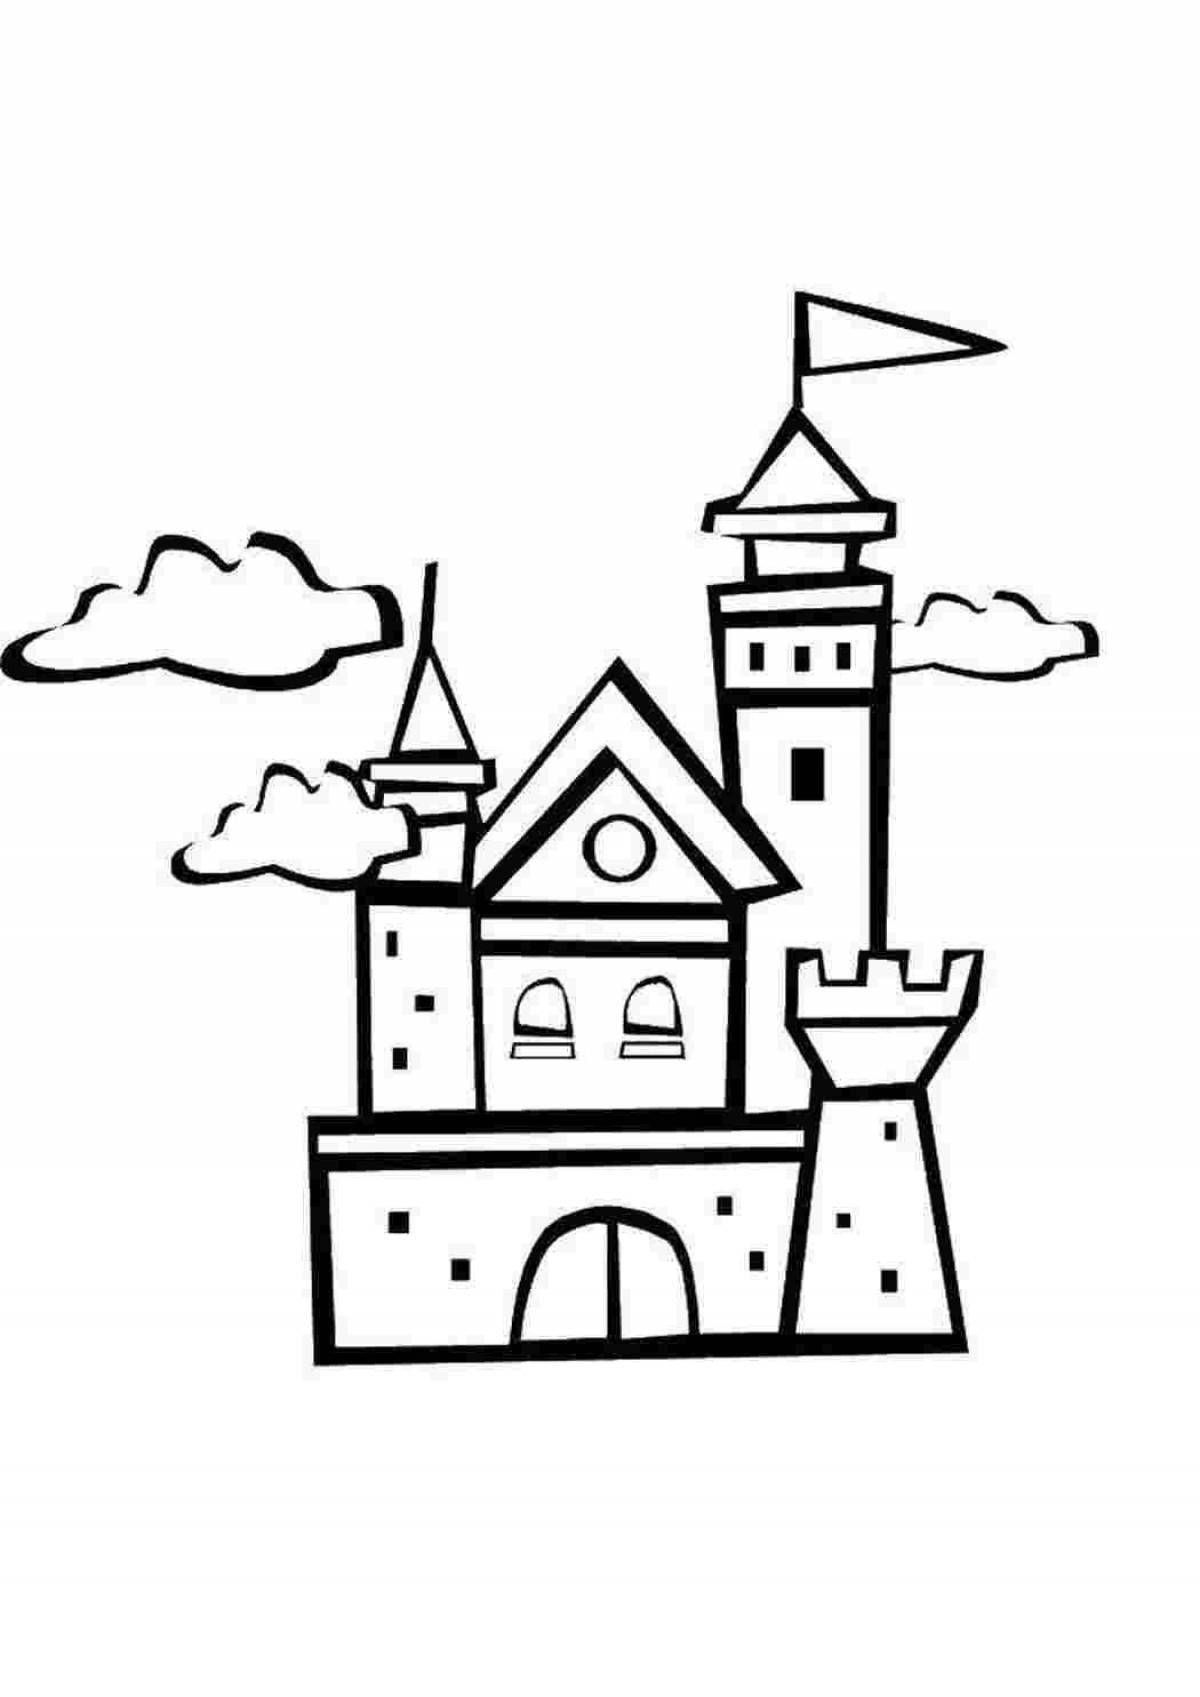 Charming castle drawing